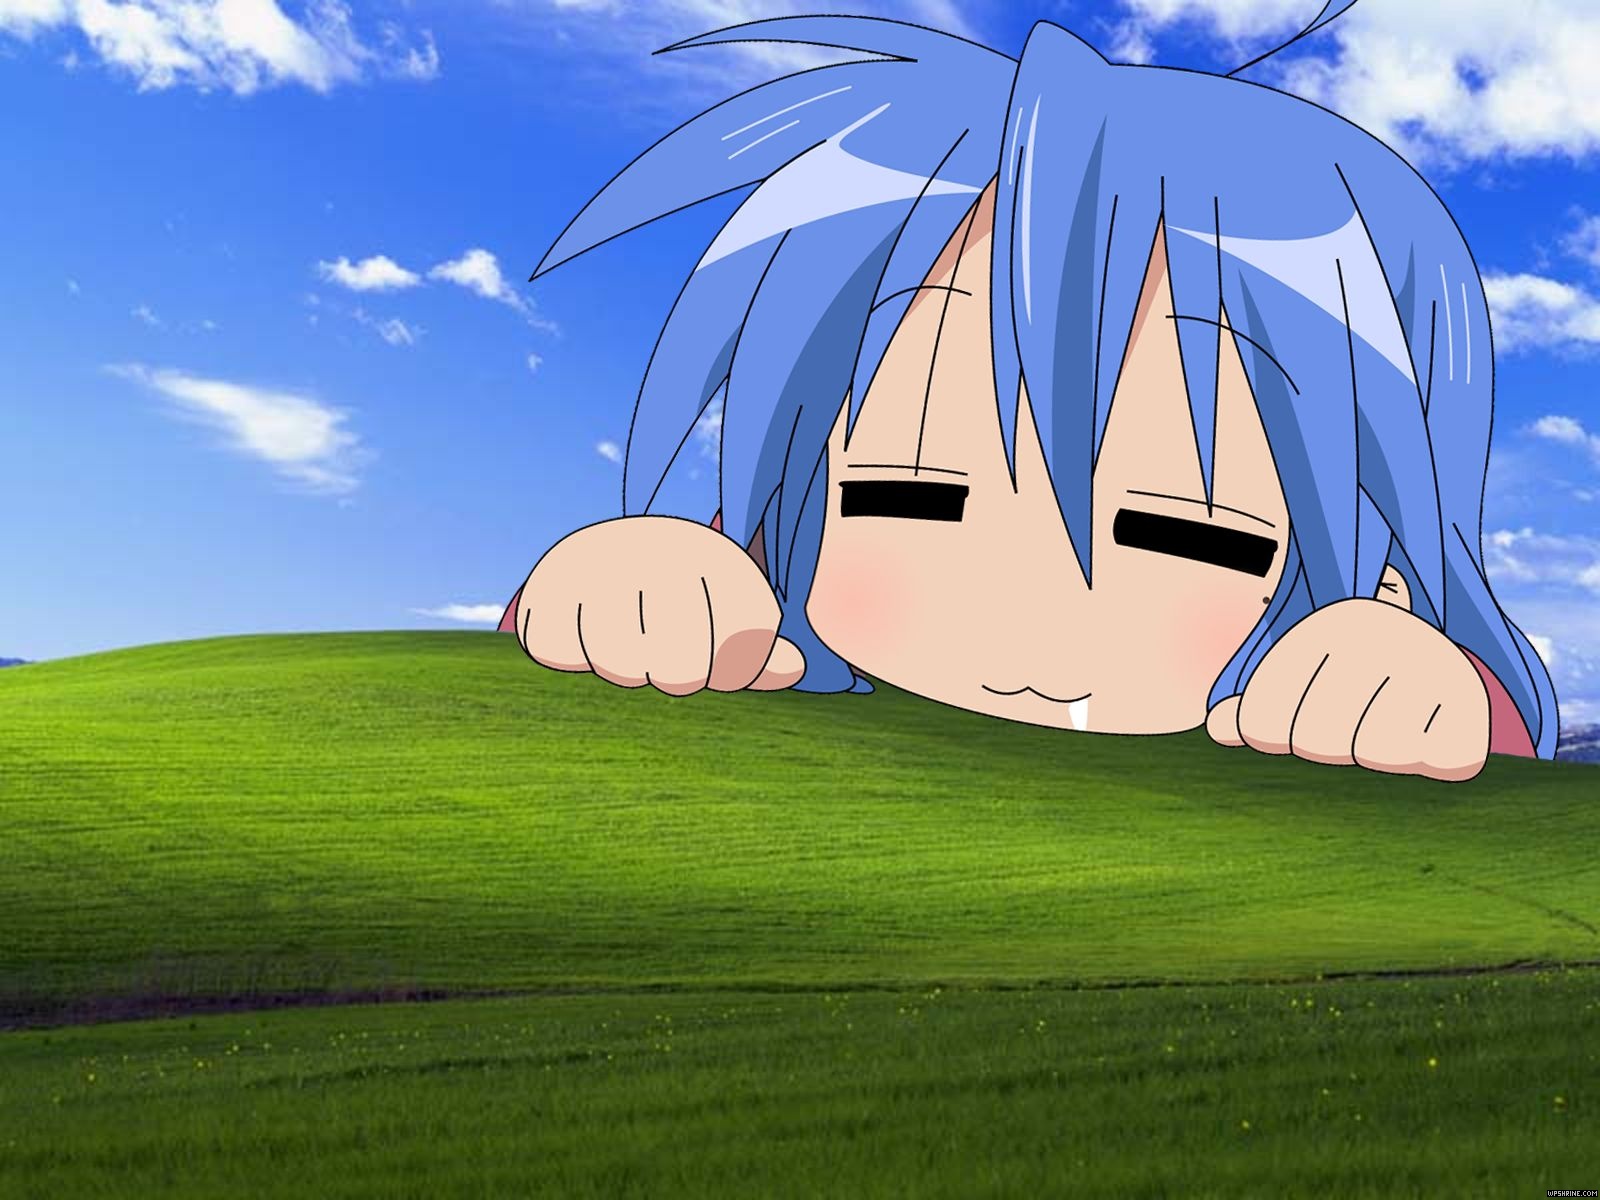 Anime character from Lucky Star sitting in a grassy field.